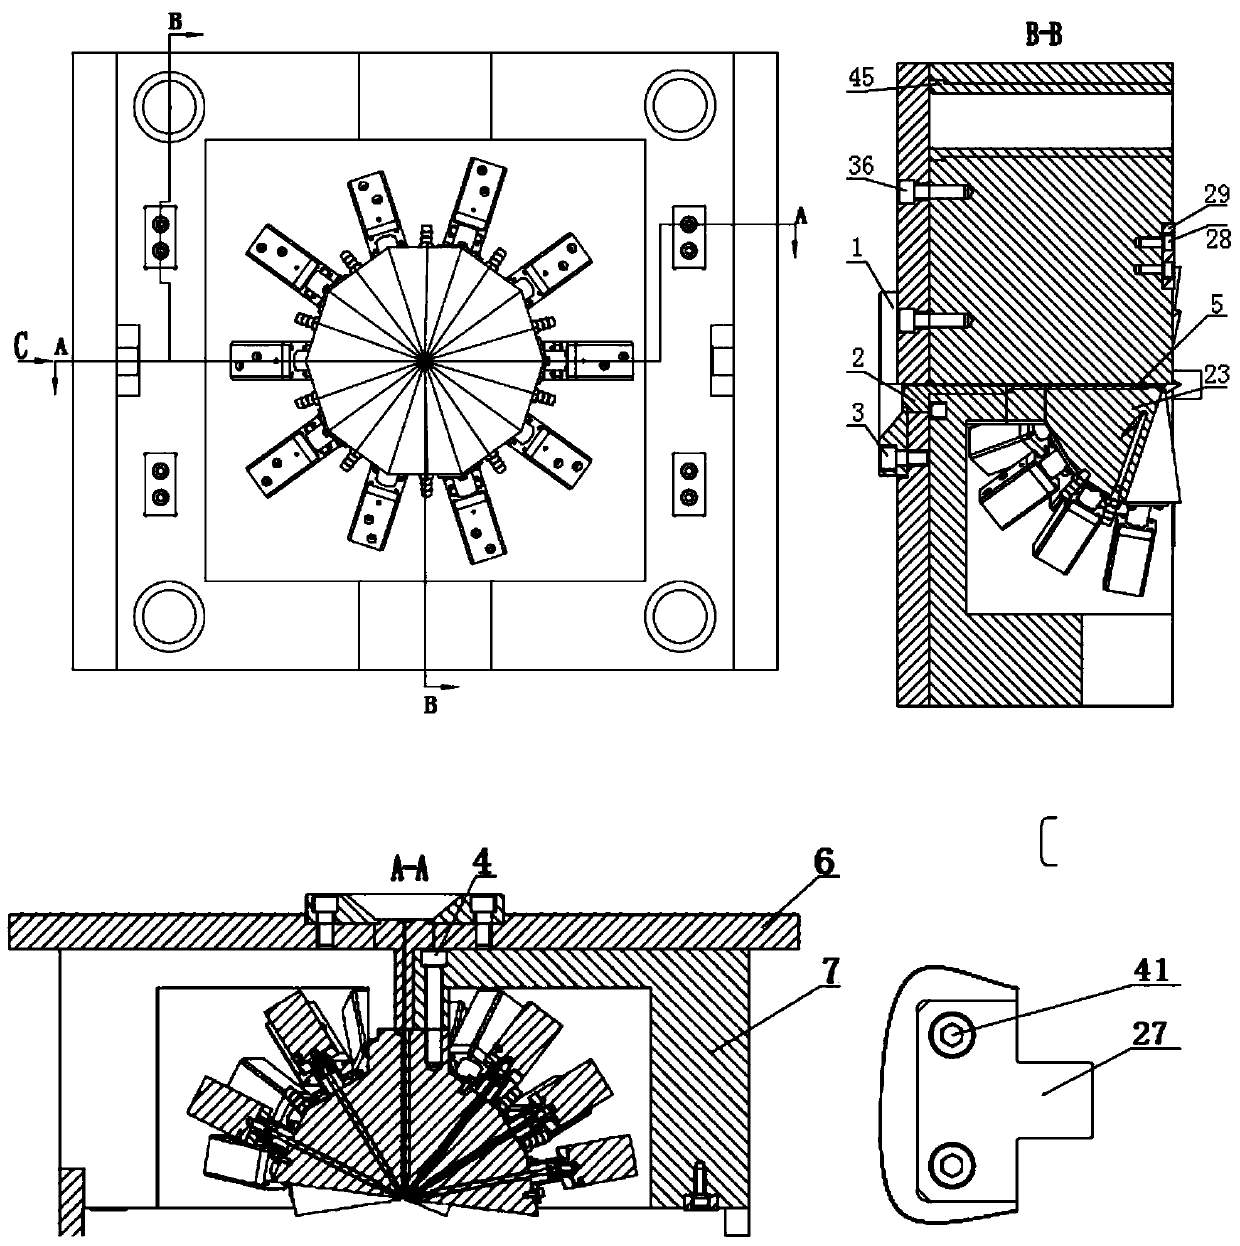 A multi-directional core-pulling injection mold for spherical skeleton parts